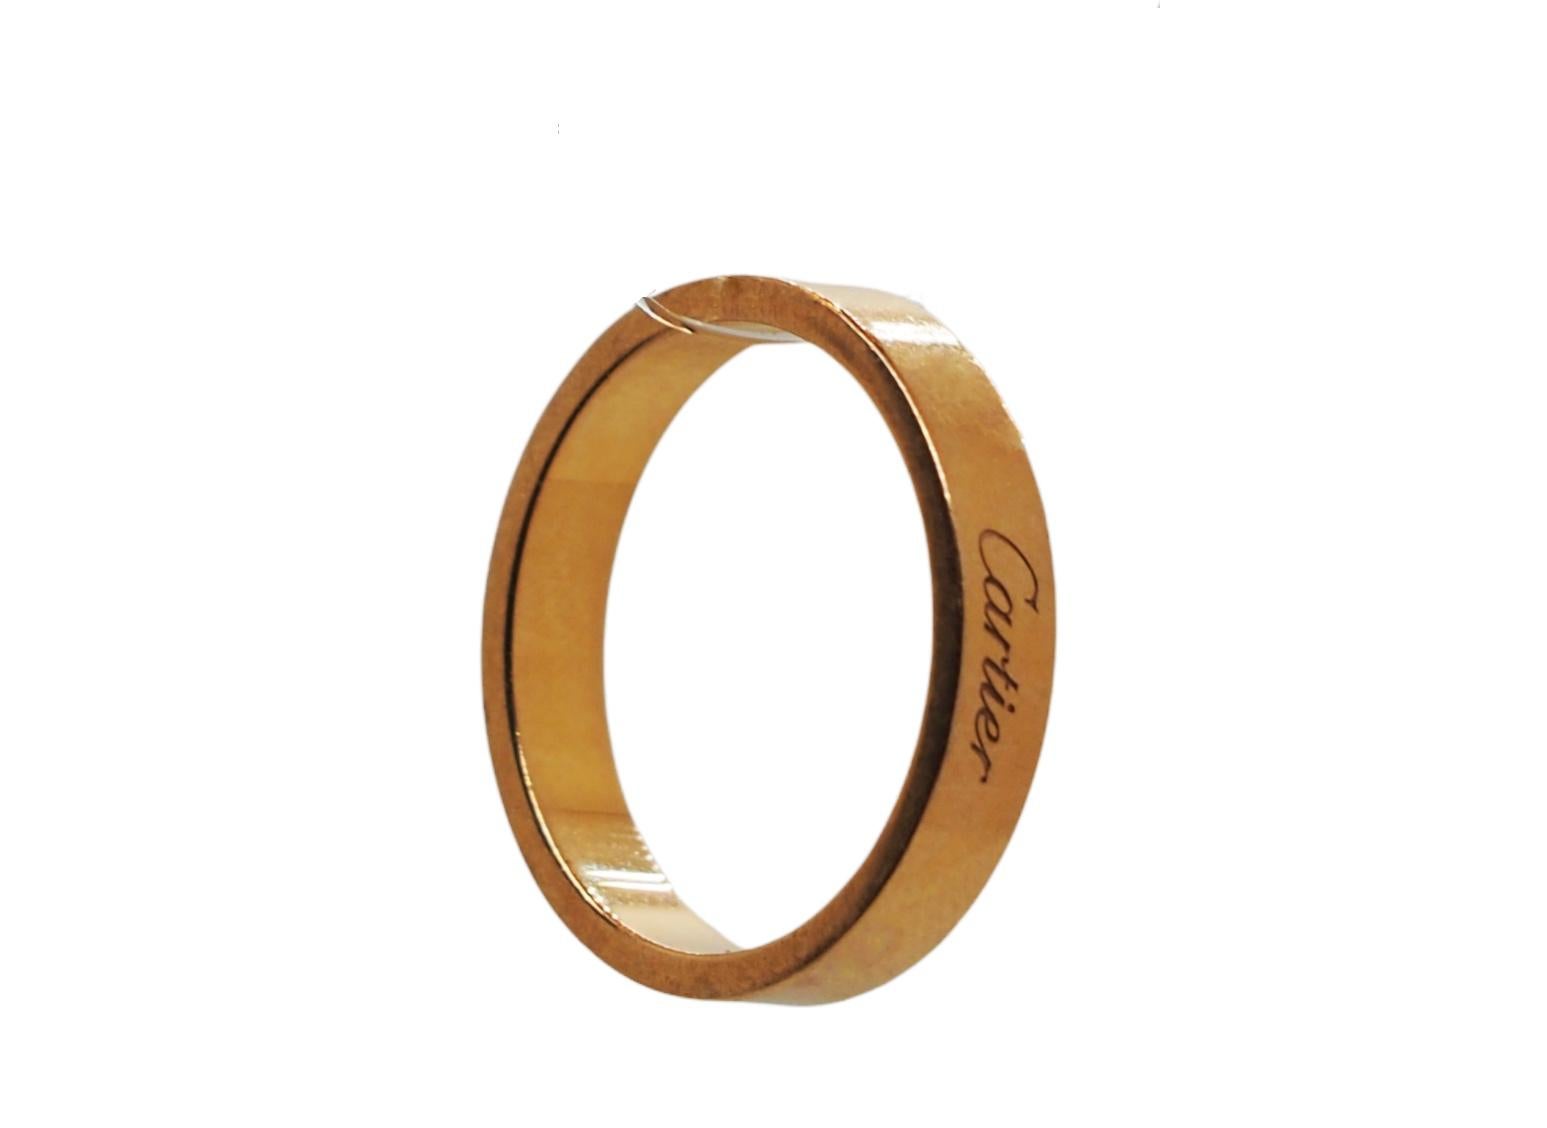 C Cartier wedding ring in a rose gold 18k. Simple and classical ring, signed cartier, punched with a serial number and 750.

Width: 3 mm 
EU size 59
US: 8.5
Total weight: 5.8 grams

The ring can be resized on request.

The ring comes complete with a